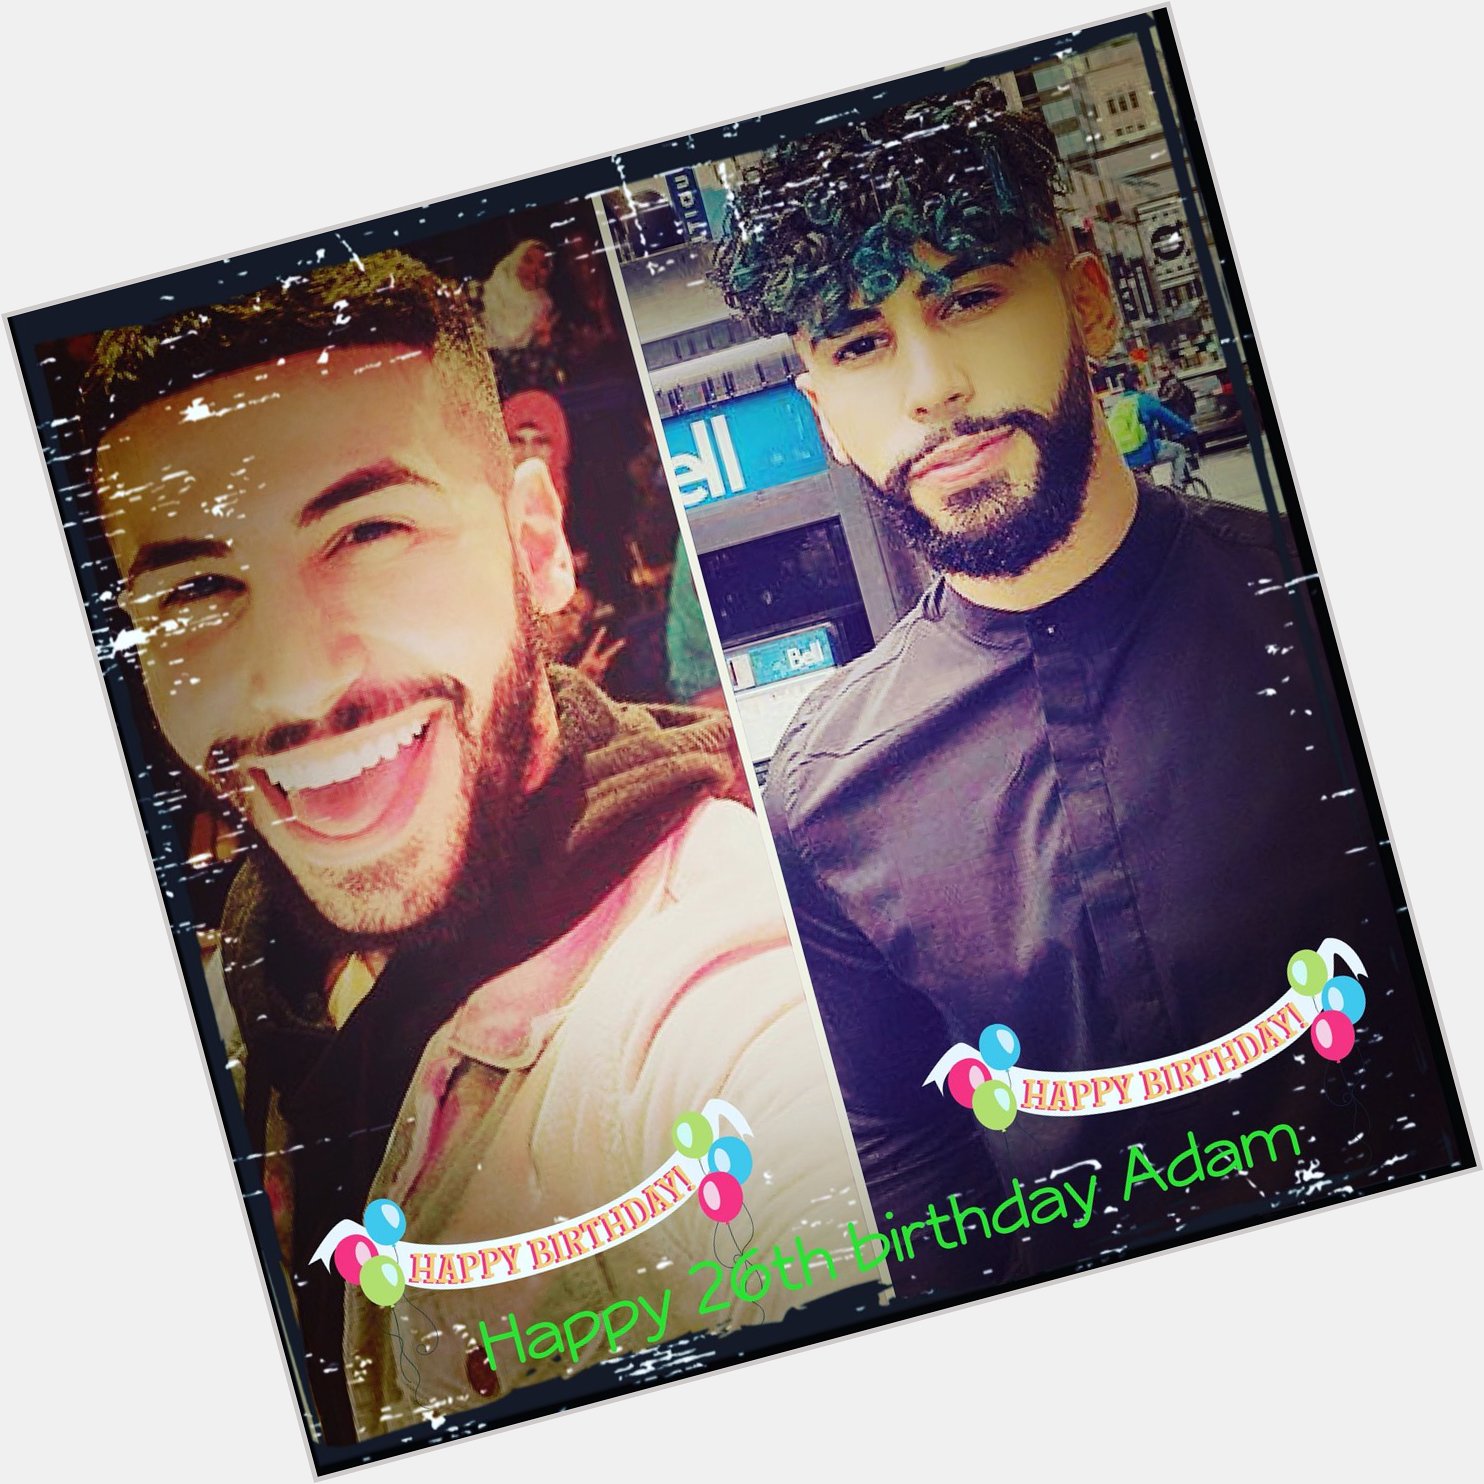 Happy birthday to the best and most dedicated YouTuber out there, Adam Saleh. 